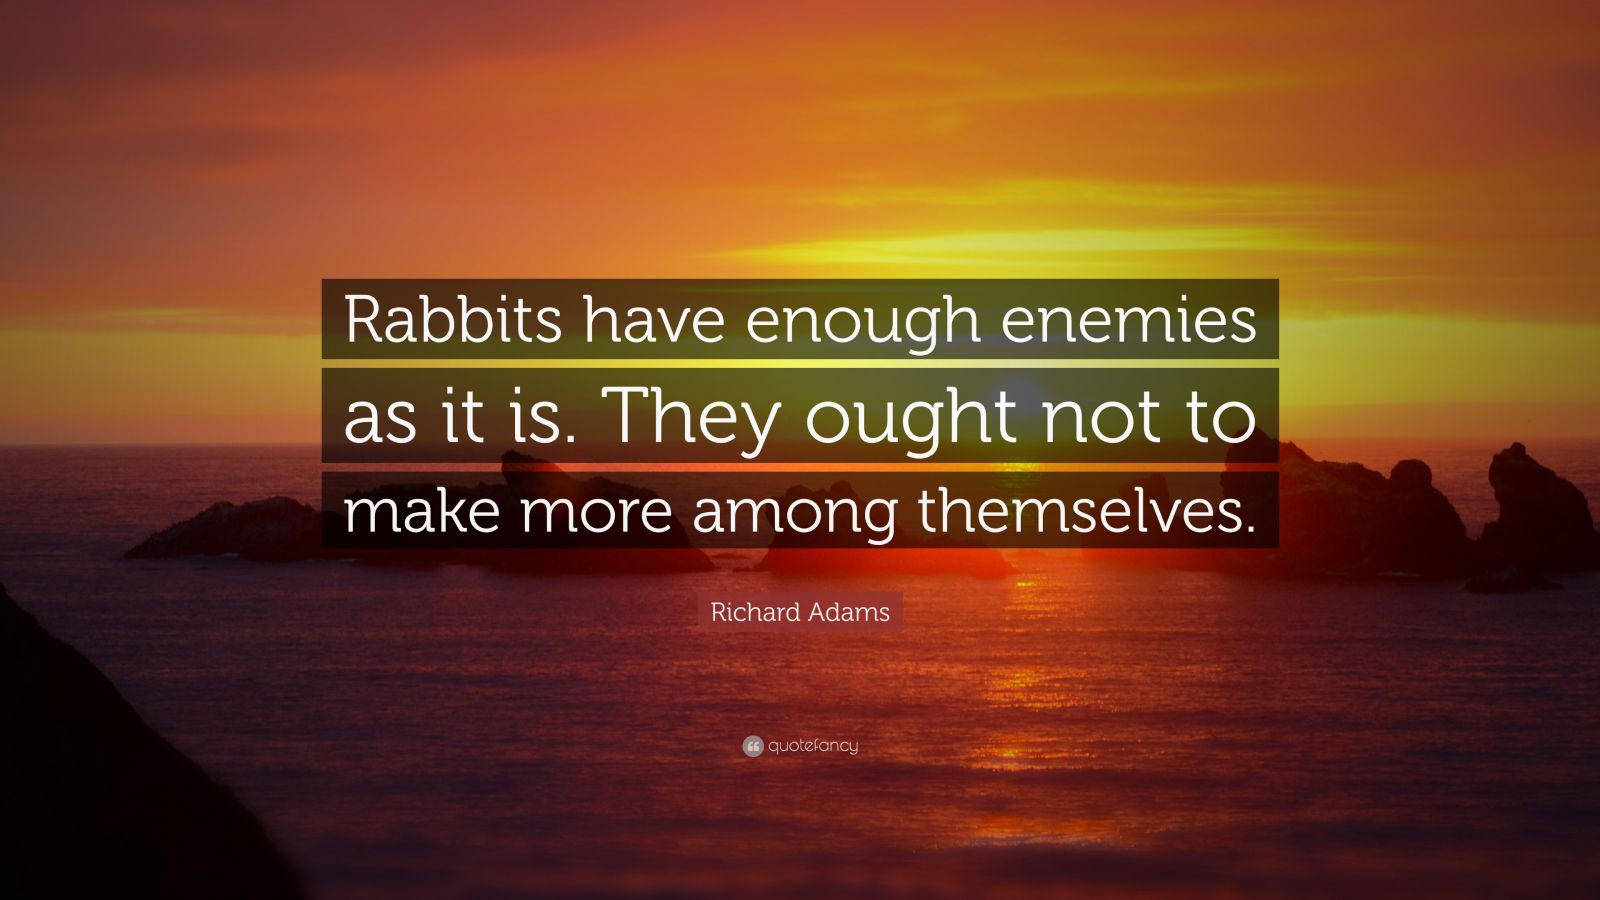 Richard Adams Quote “rabbits Have Enough Enemies As It Is They Ought Not To Make More Among 